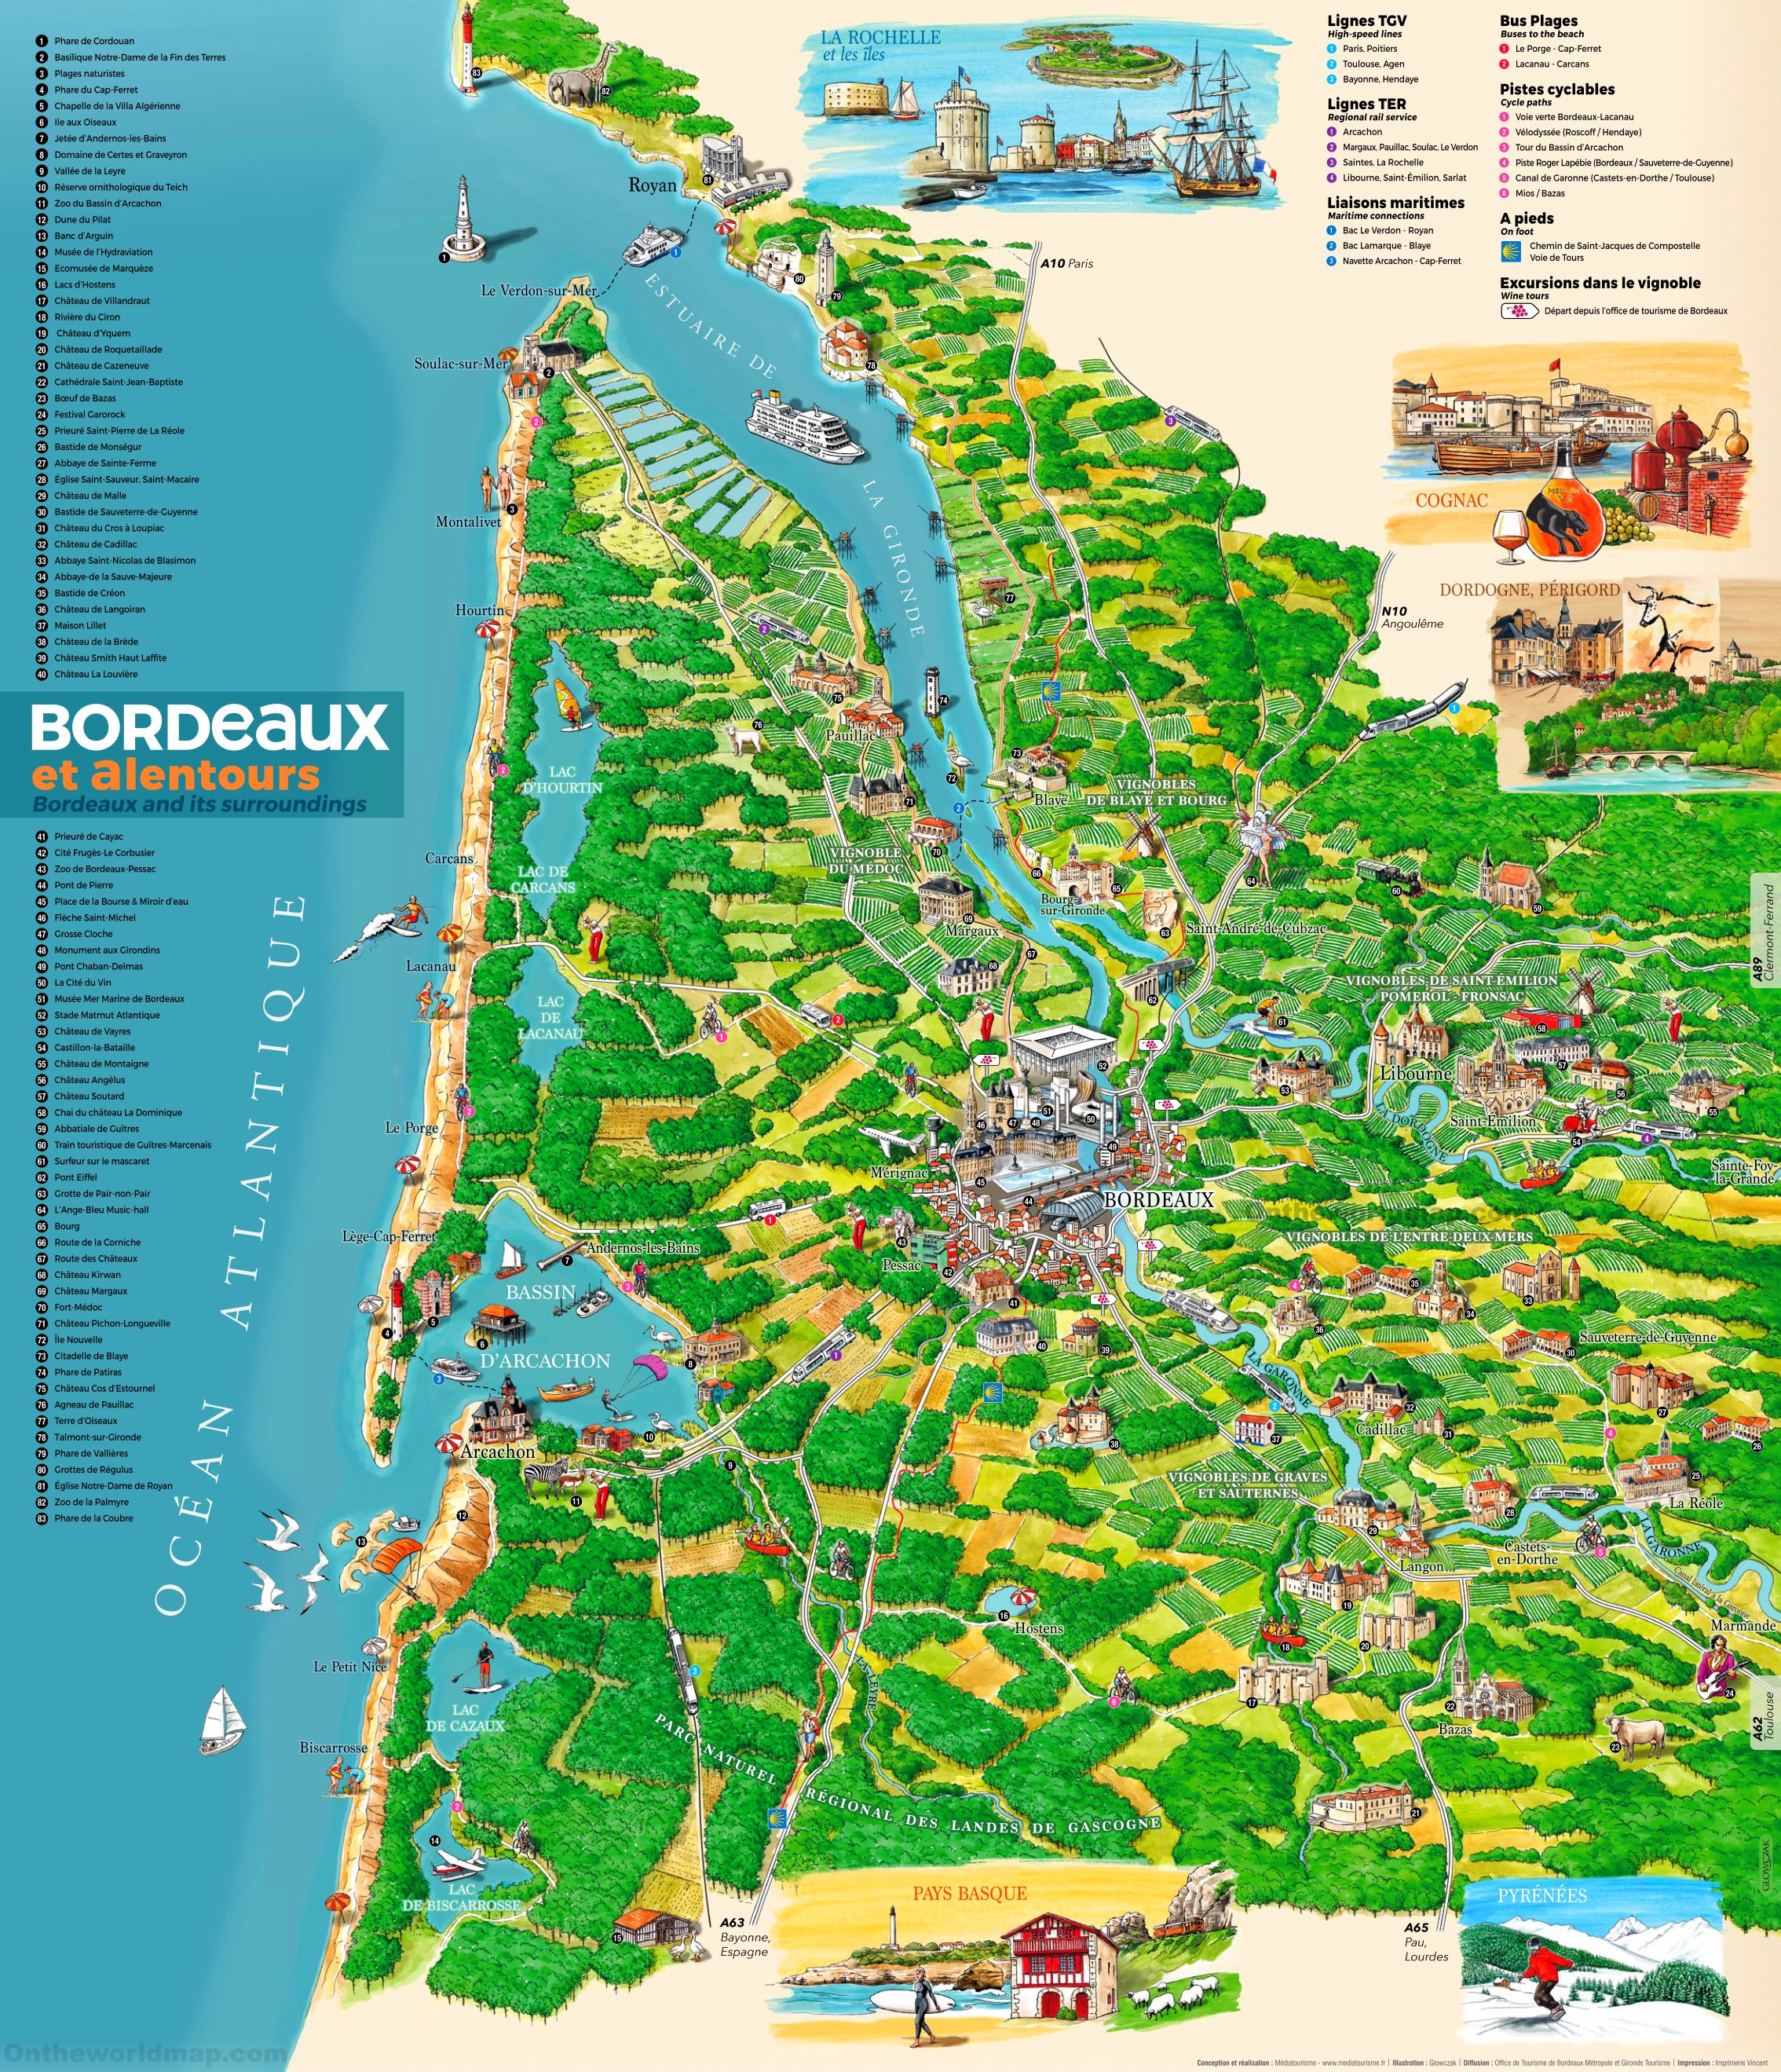 bordeaux and dordogne france on map